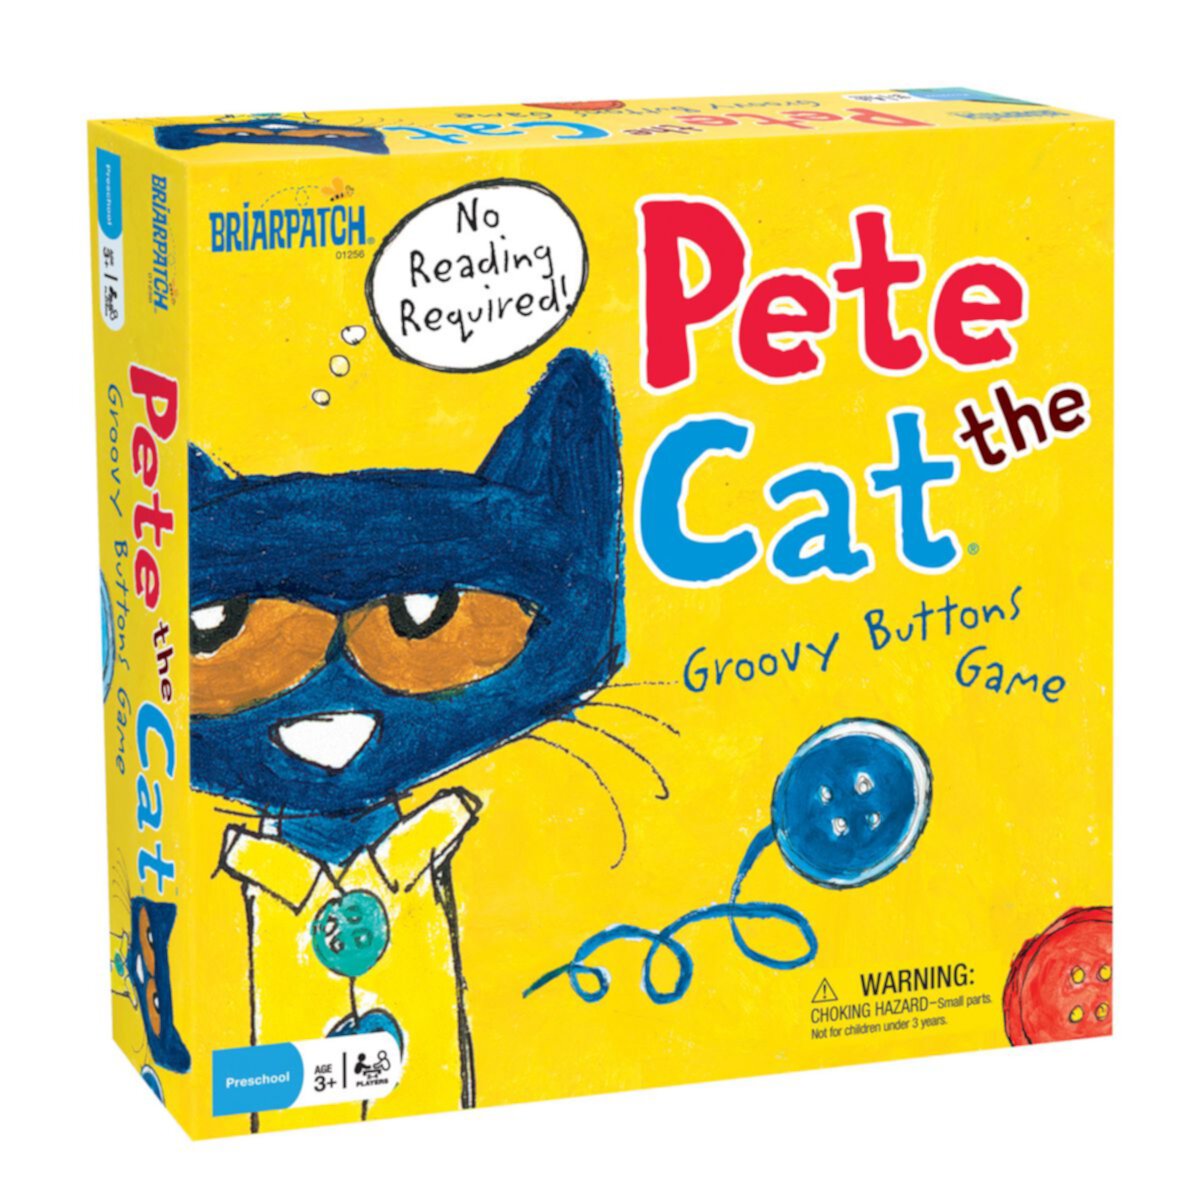 Briarpatch Pete the Cat Groovy Buttons Game Briarpatch